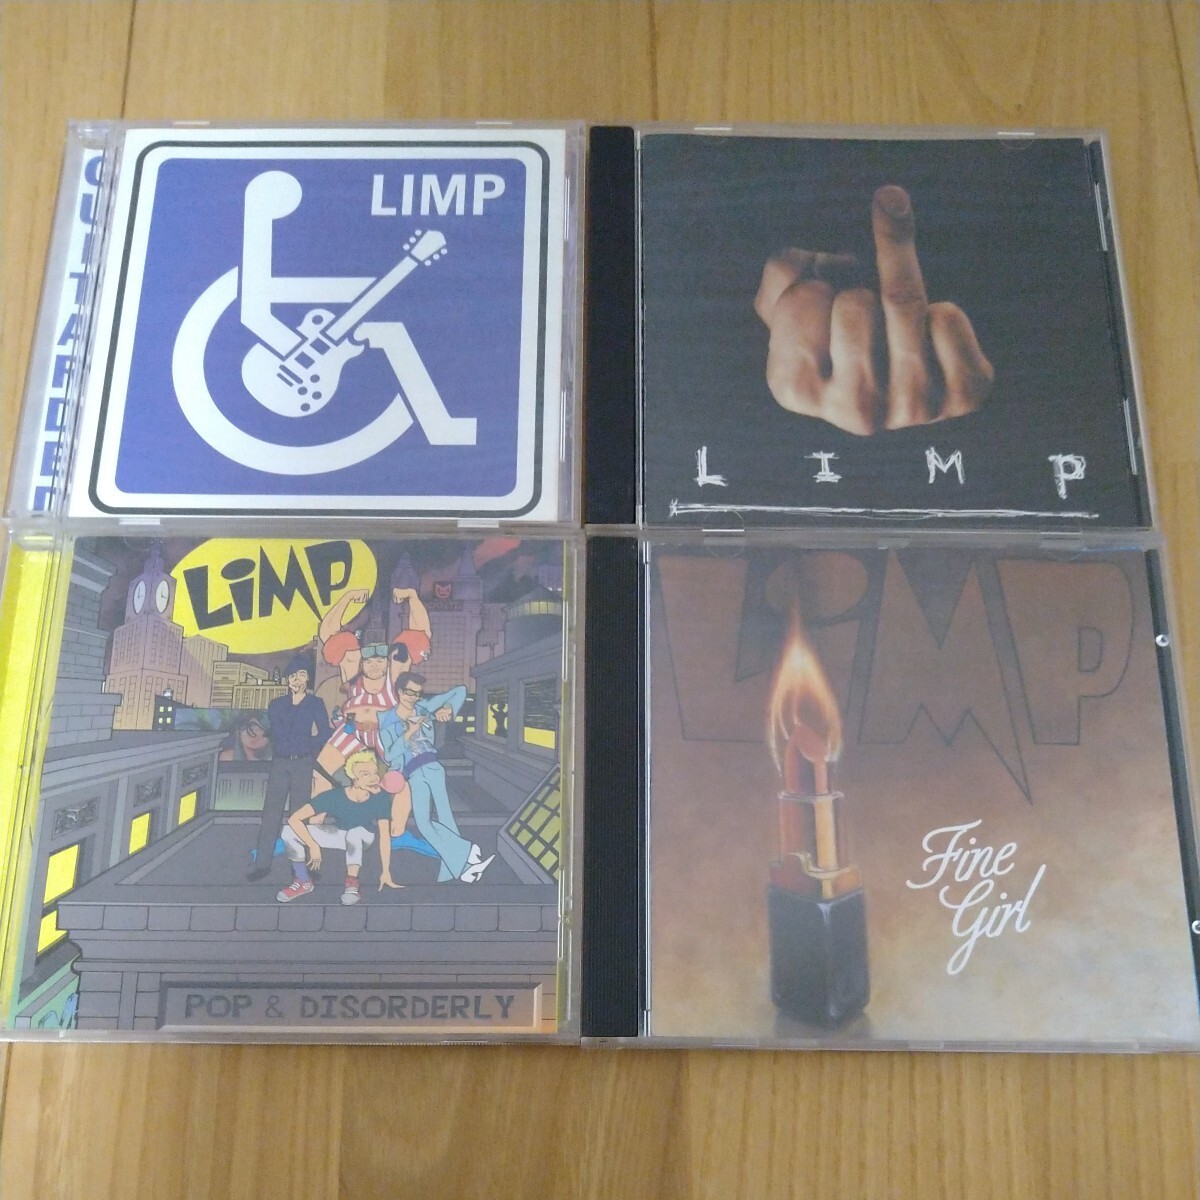 LIMP EPITAPH FAT WRECK BURNING HEART SBUM THEOLOGIAN FOND OF LIFE LOST AND FOUND TOOTH AND NAIL BAD TASTE LOOKOUT ONEFOOT_画像1